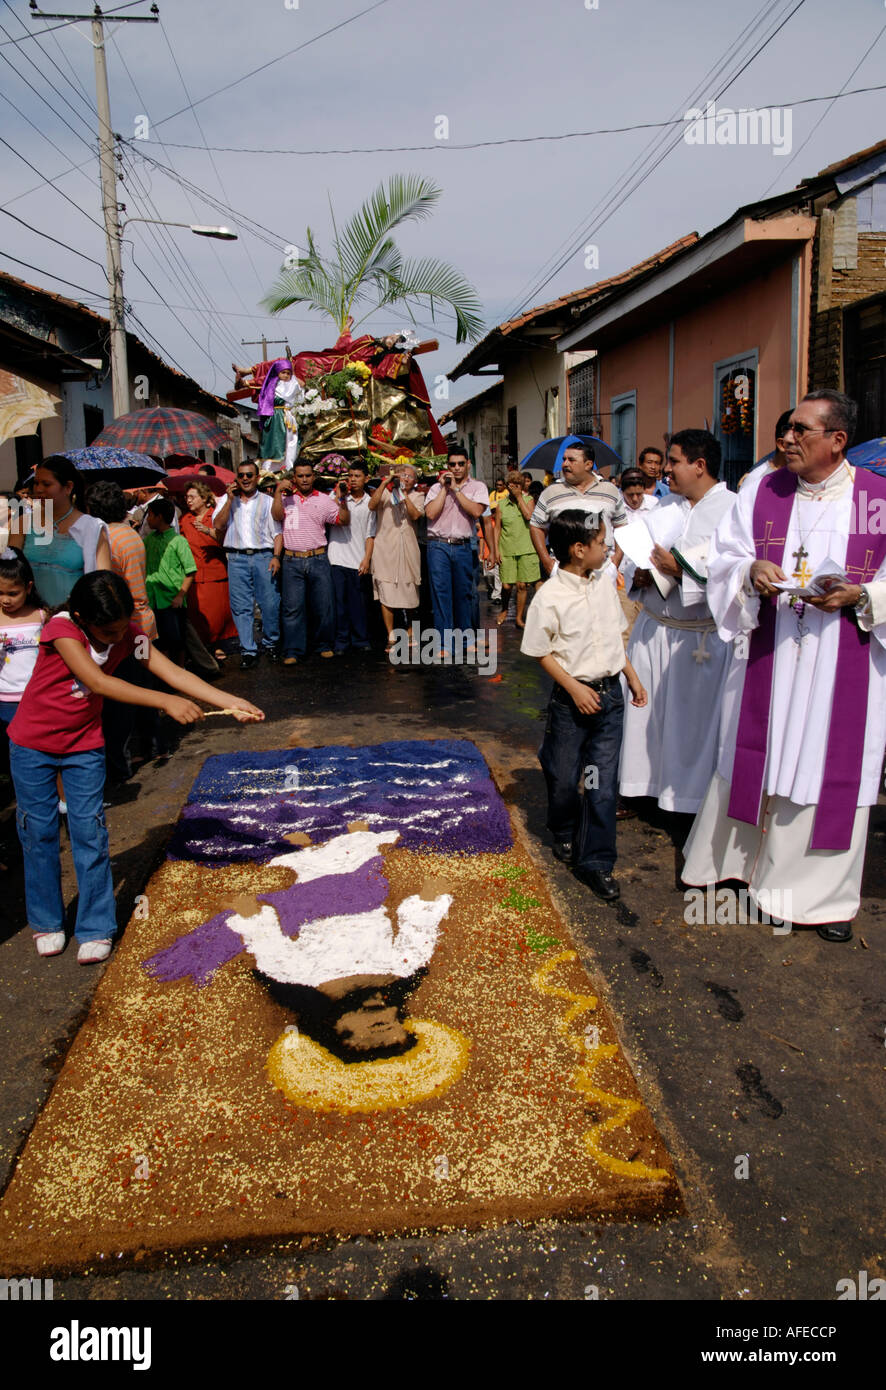 Devotees carry a model of the crucifiction over a sawdust carpet during a Semana Santa procession, Leon, Nicaragua Stock Photo